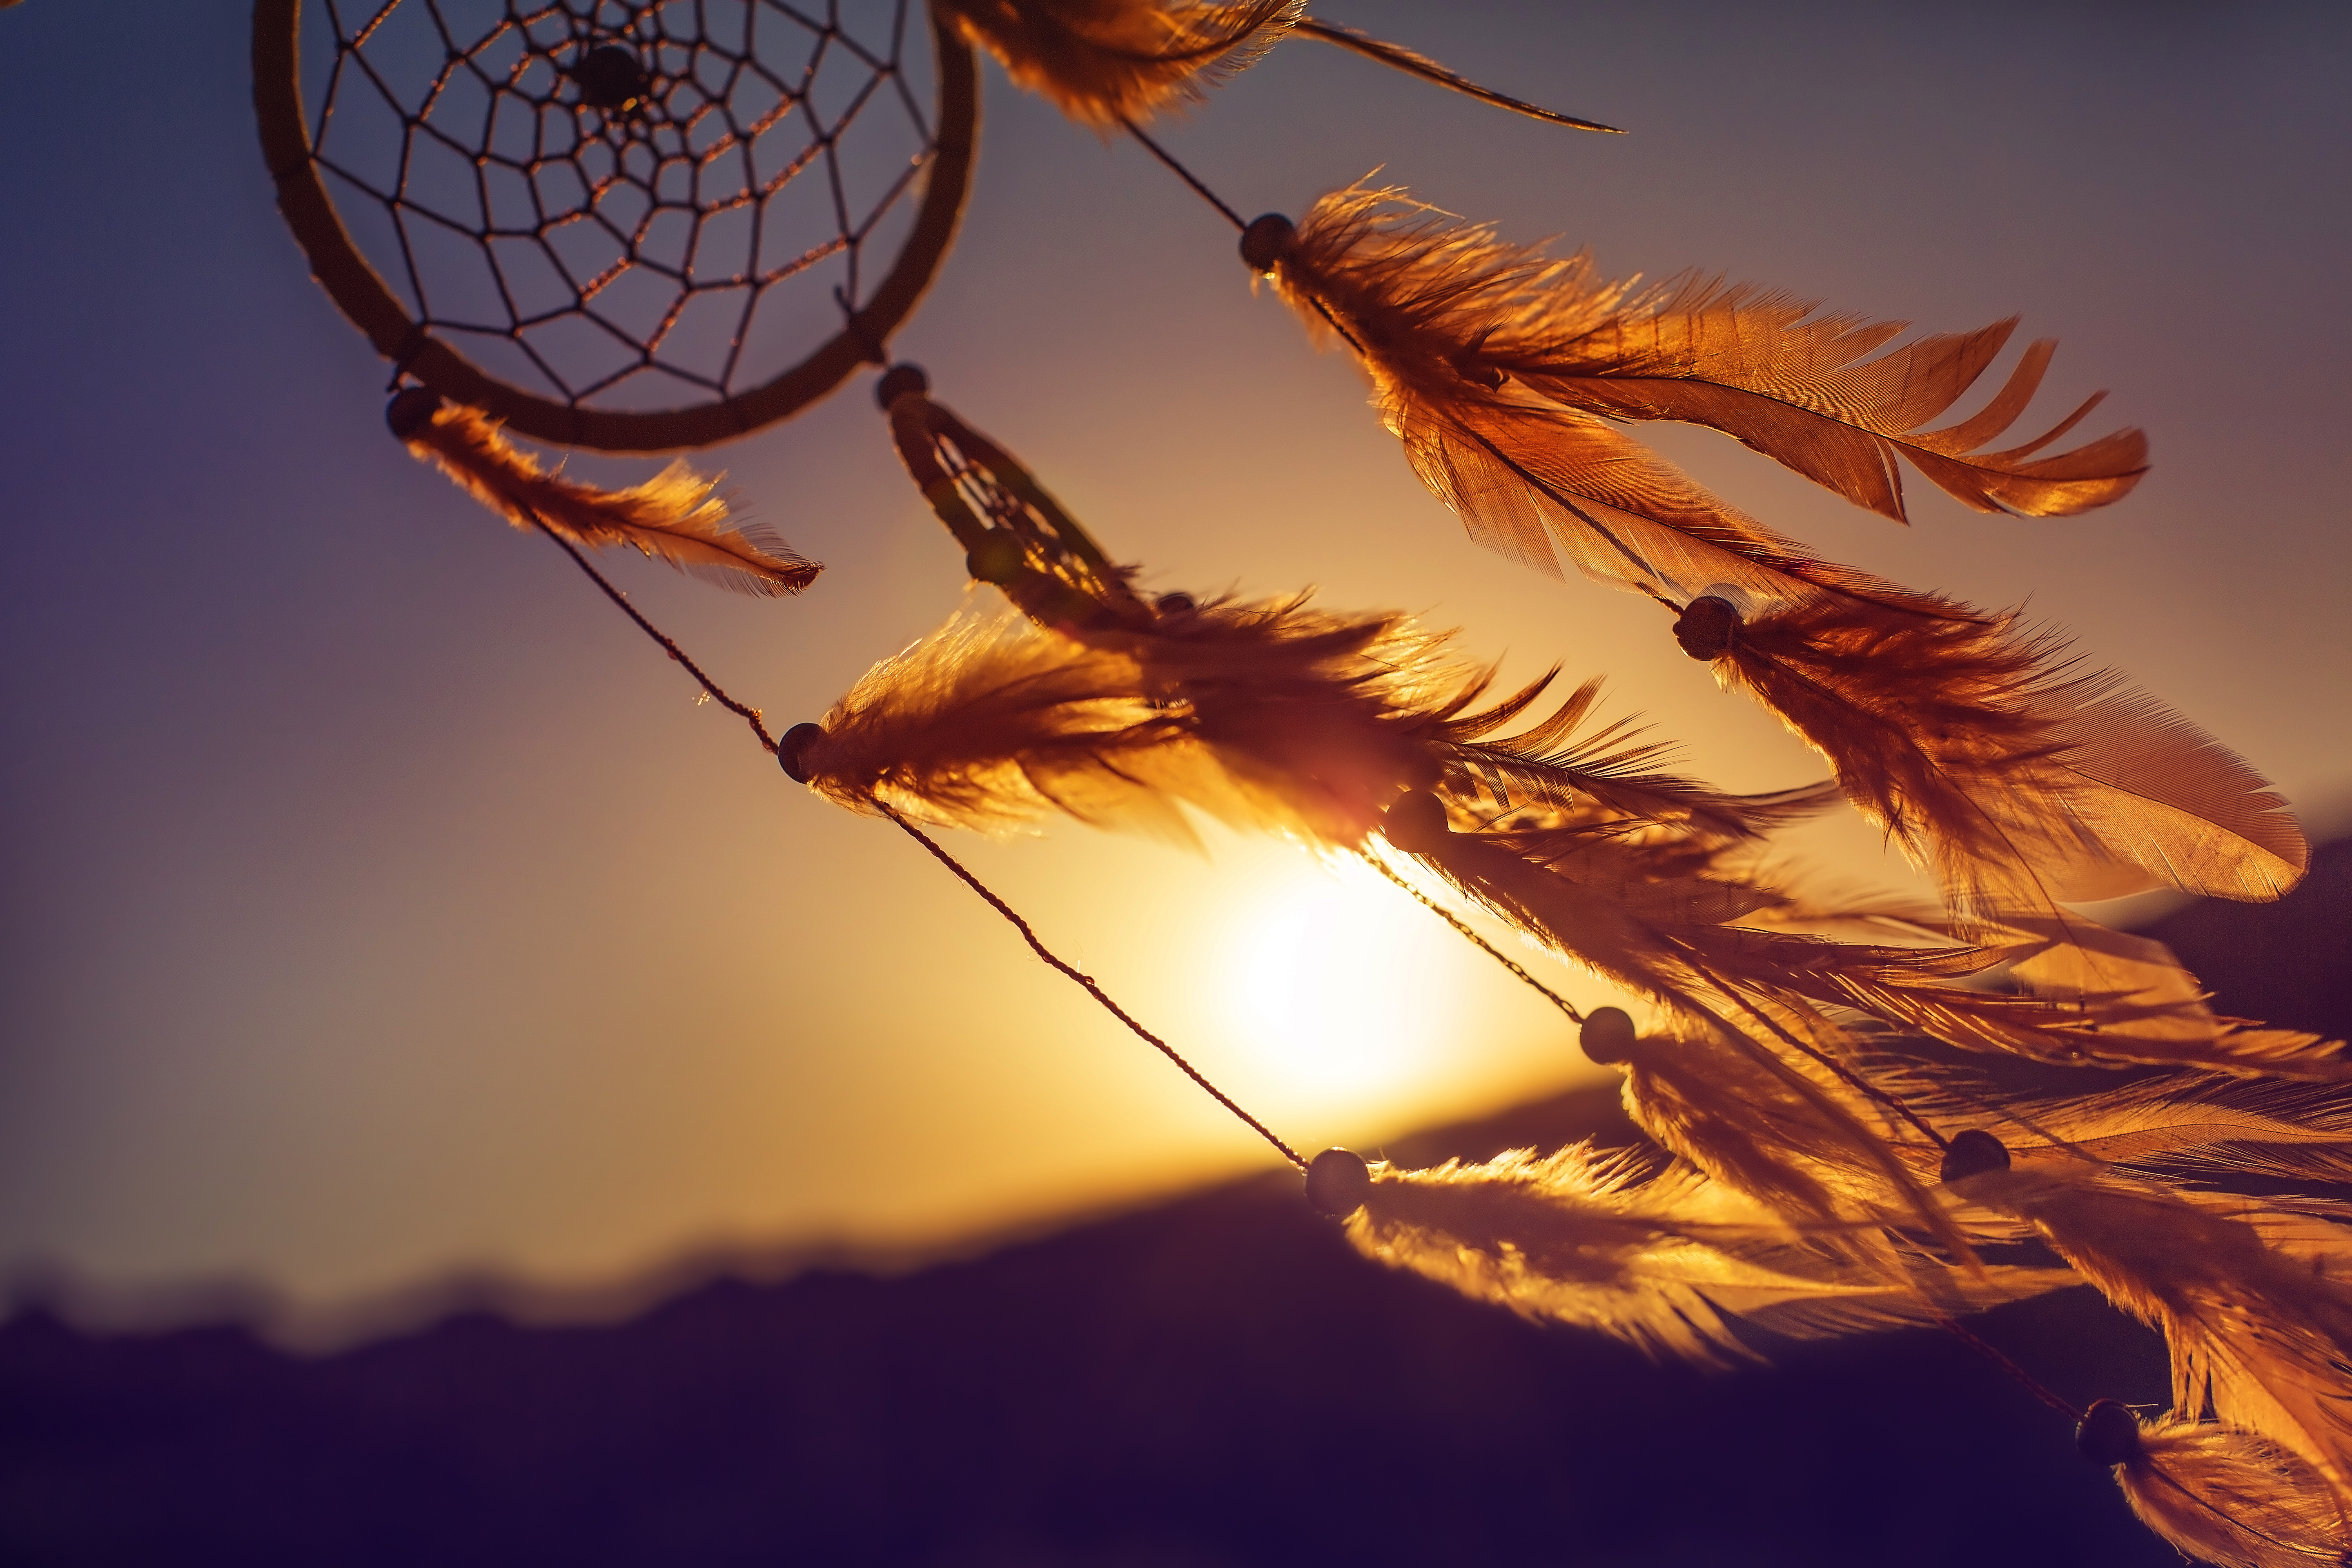 A dreamcatcher blown by the wind during sunset | Source: Shutterstock